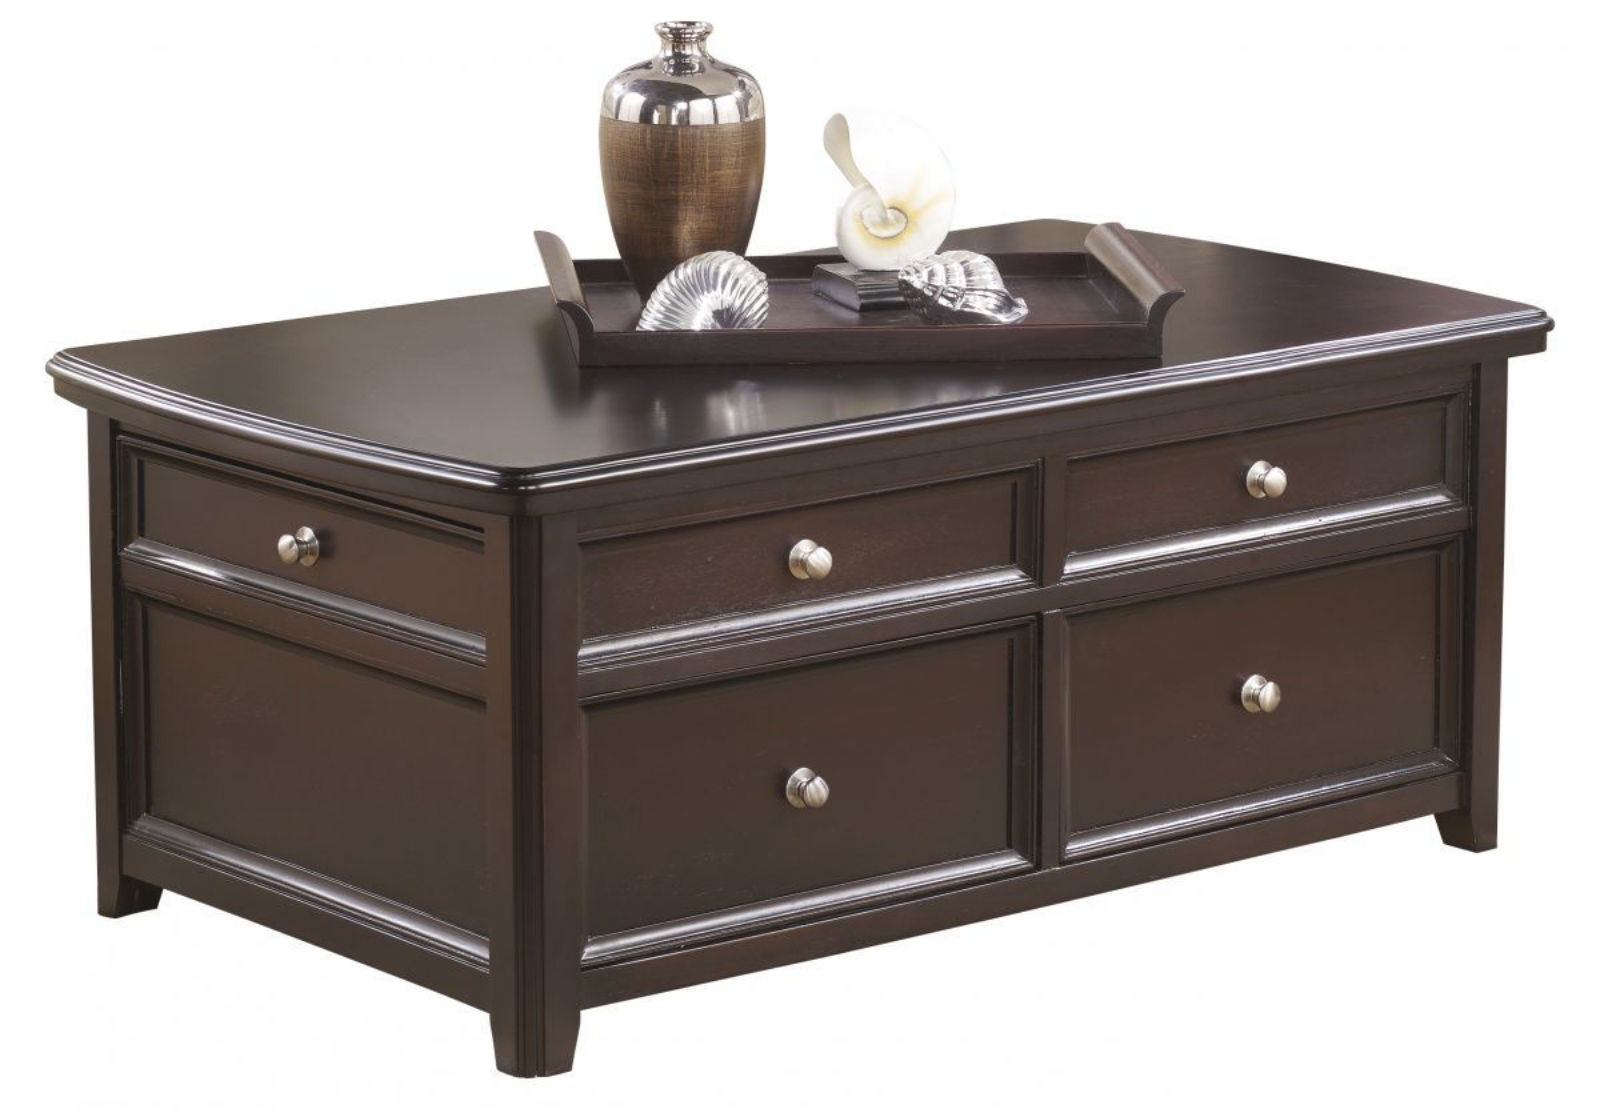 Picture of Carlyle Coffee Table